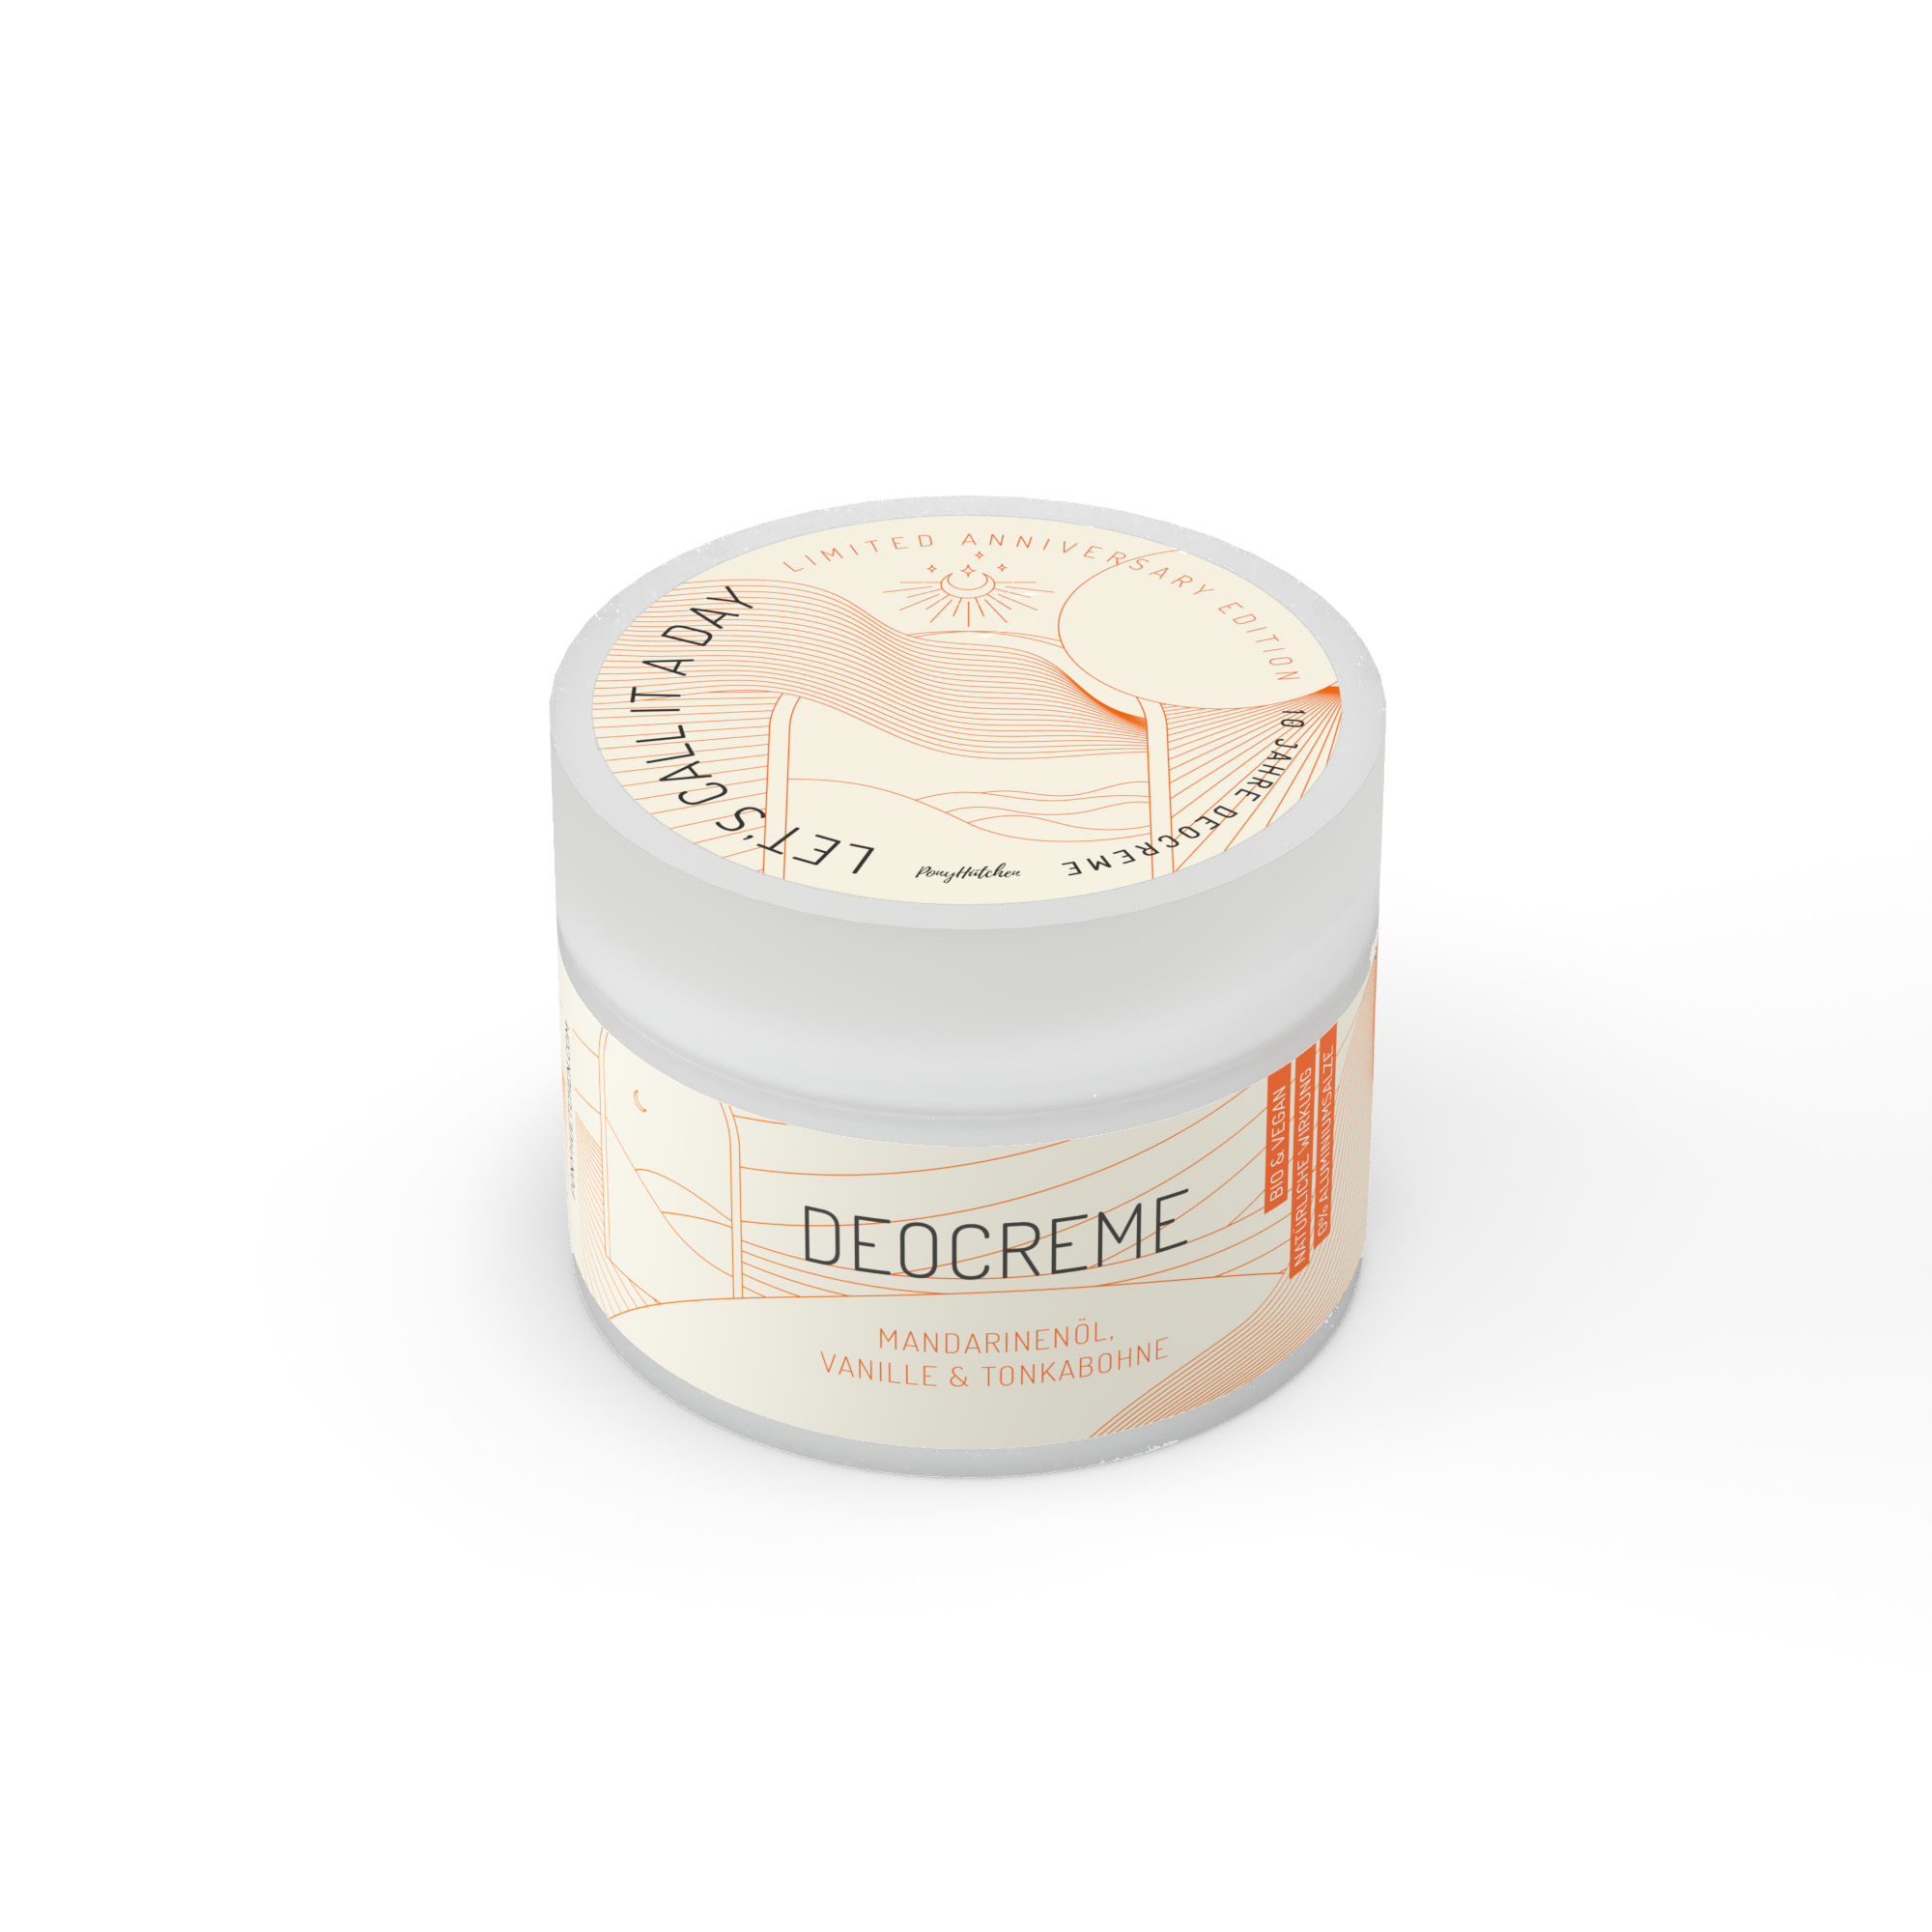 Deocreme Let's Call It A Day - Limited Edition